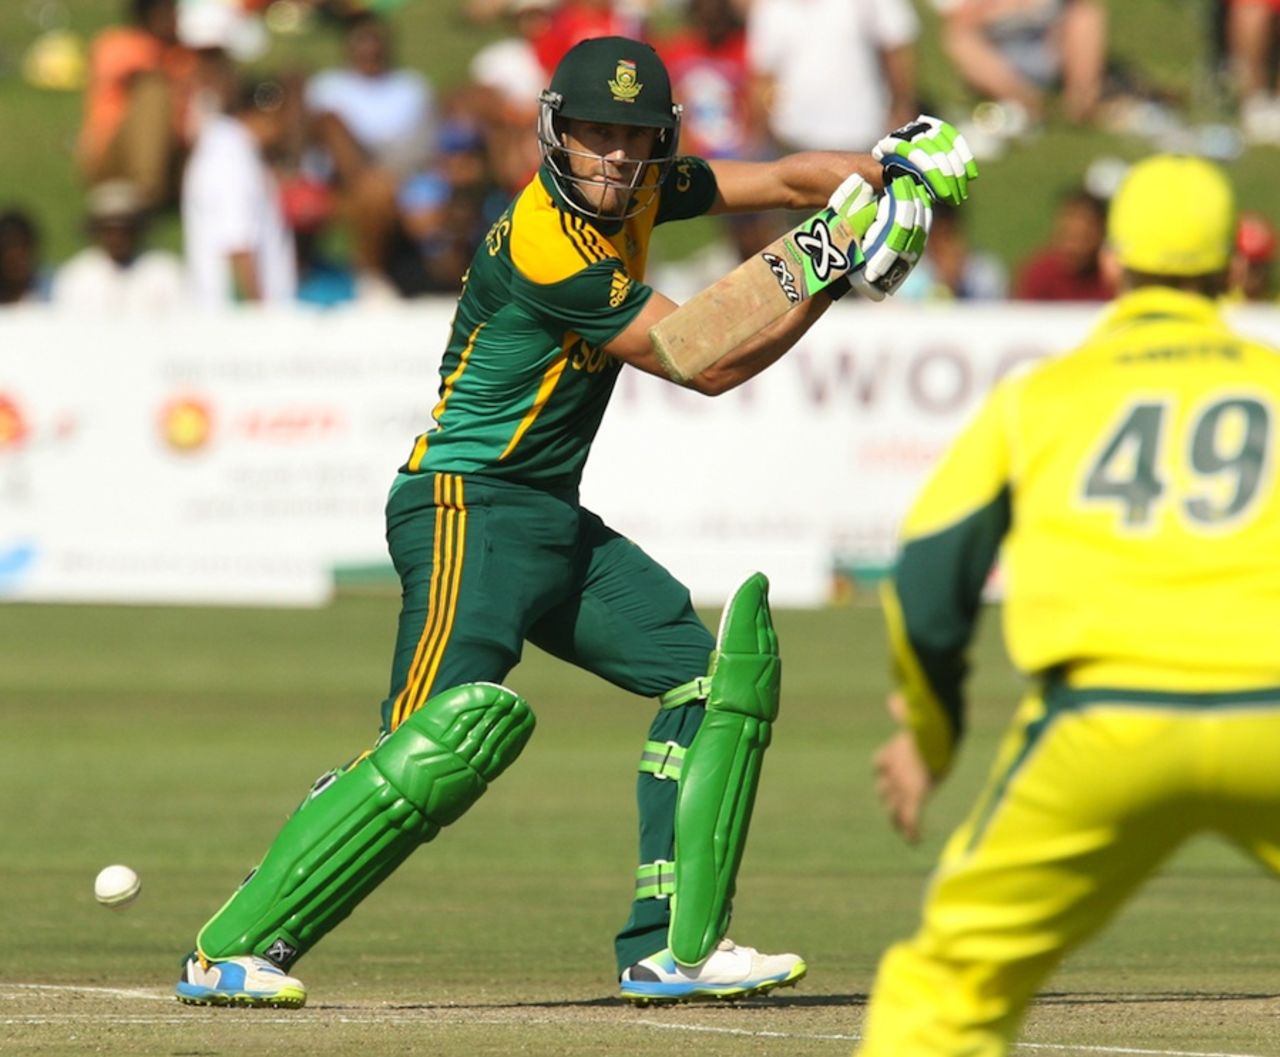 Faf du Plessis plays the ball towards point, Australia v South Africa, tri-series, Harare, August 27, 2014